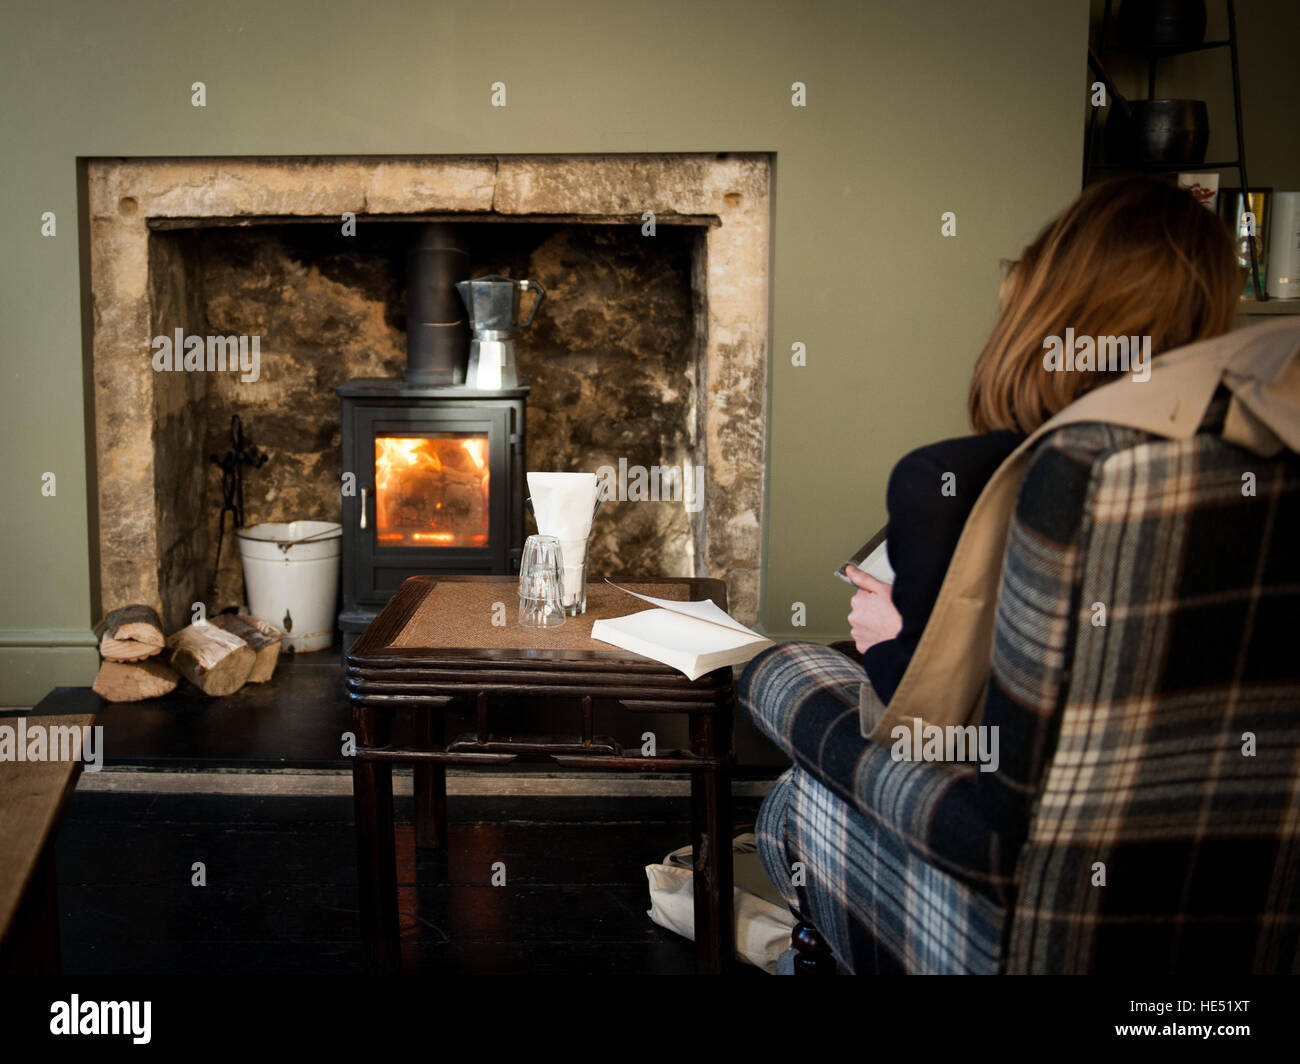 Woman cosy reading a book in front of a log burner which may be banned in UK Stock Photo